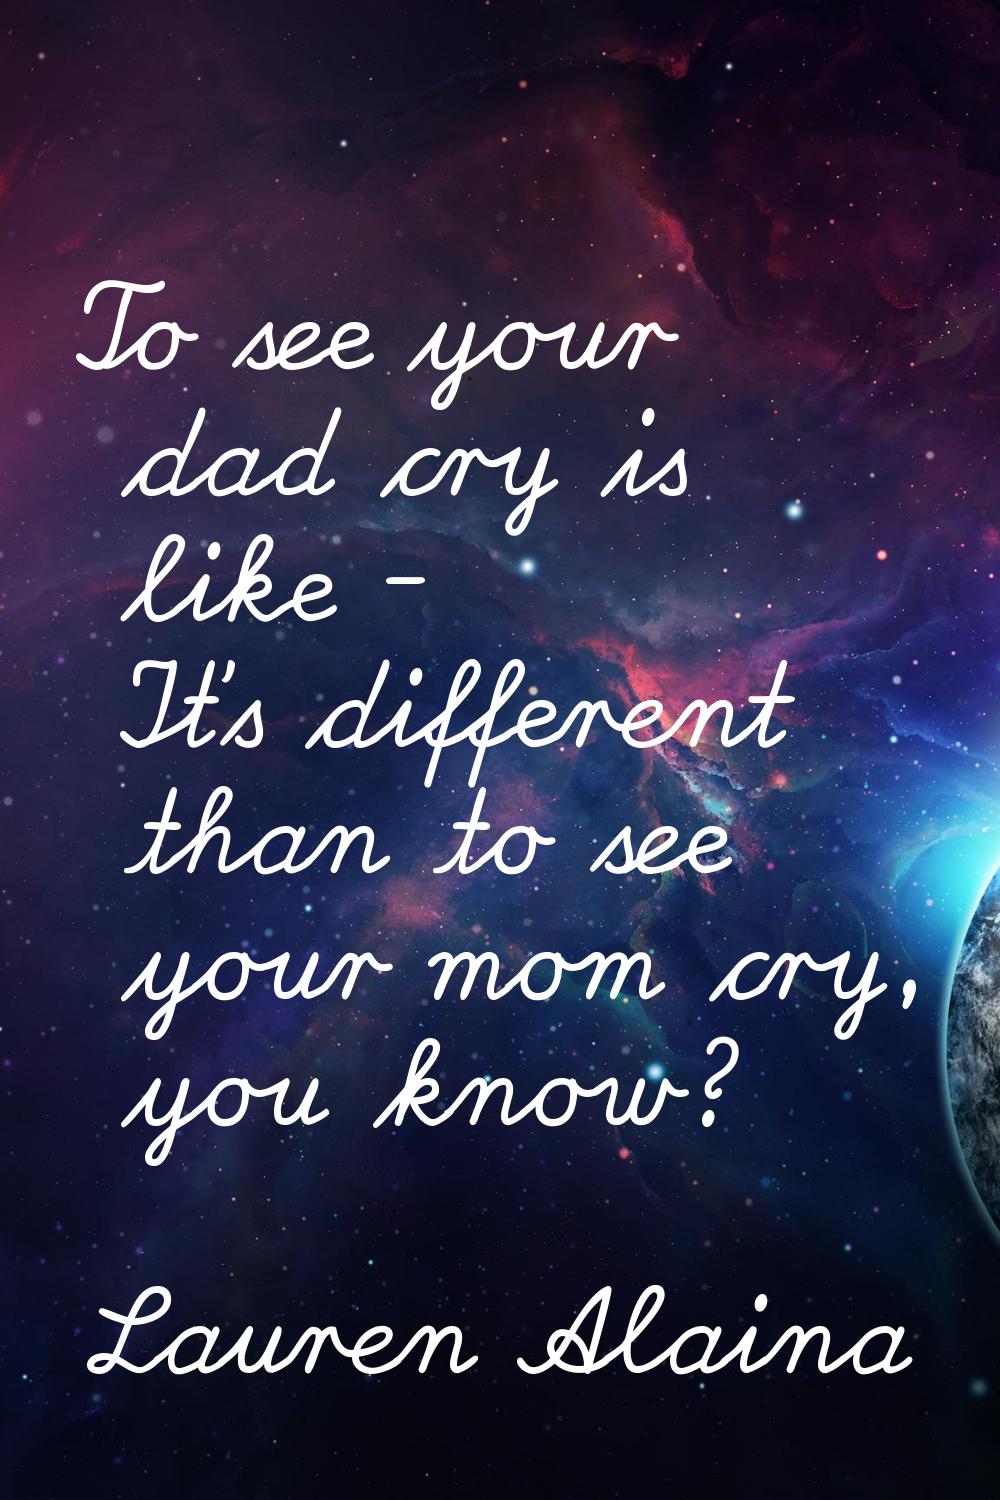 To see your dad cry is like - It's different than to see your mom cry, you know?